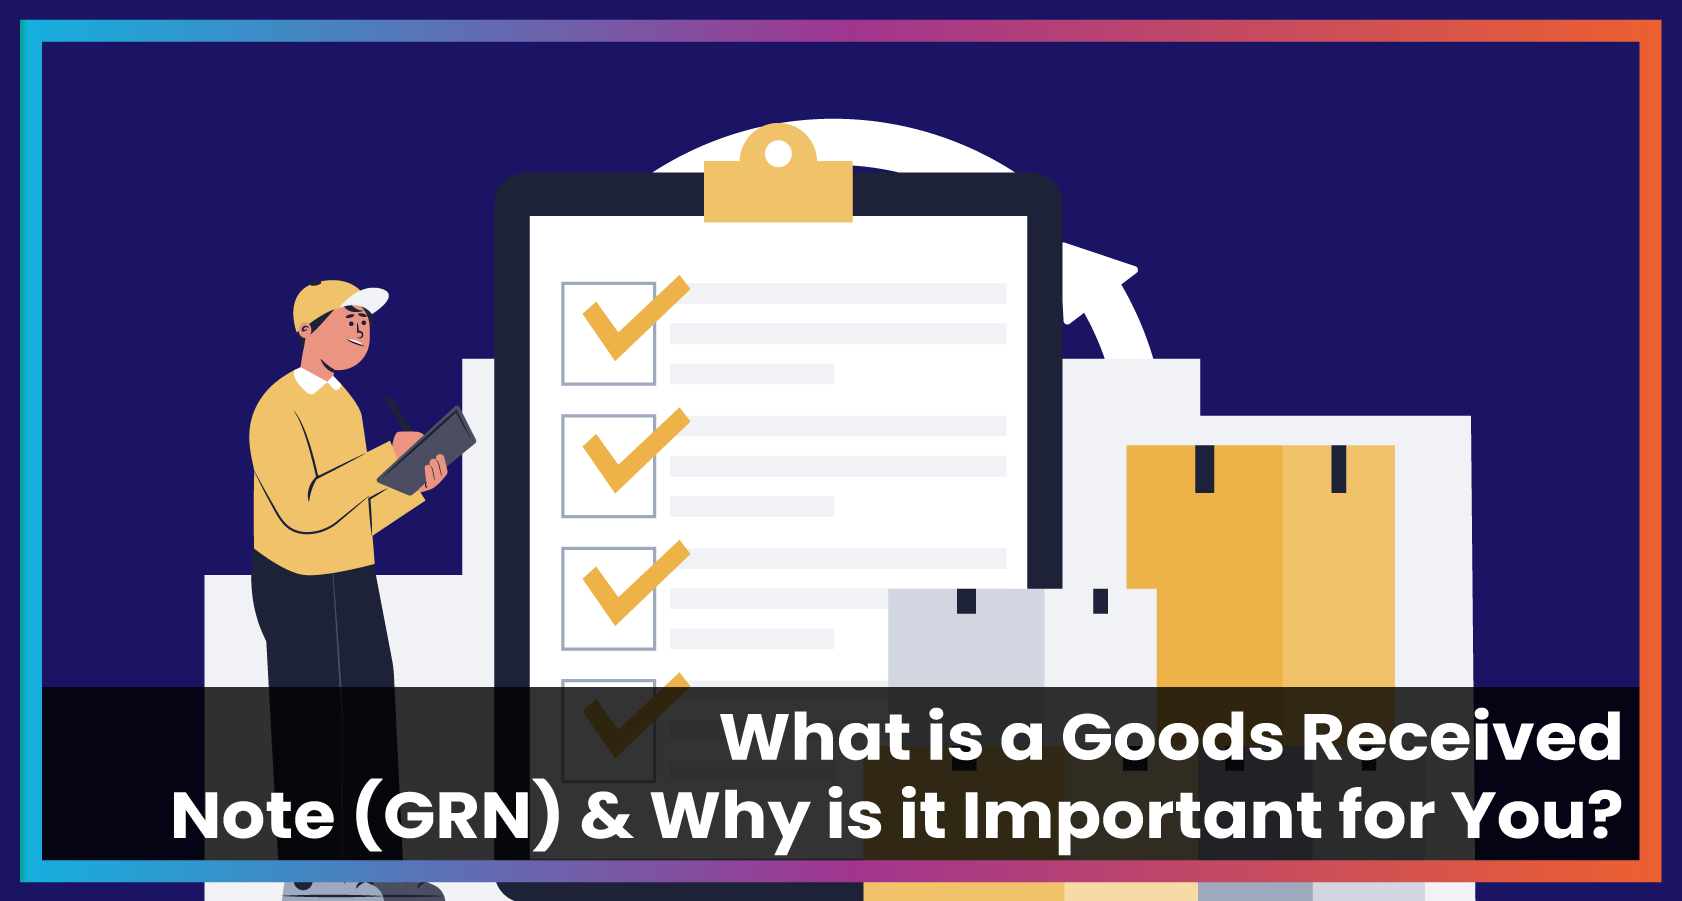 What is a Goods Received Note (GRN) & Why is it Important for You?